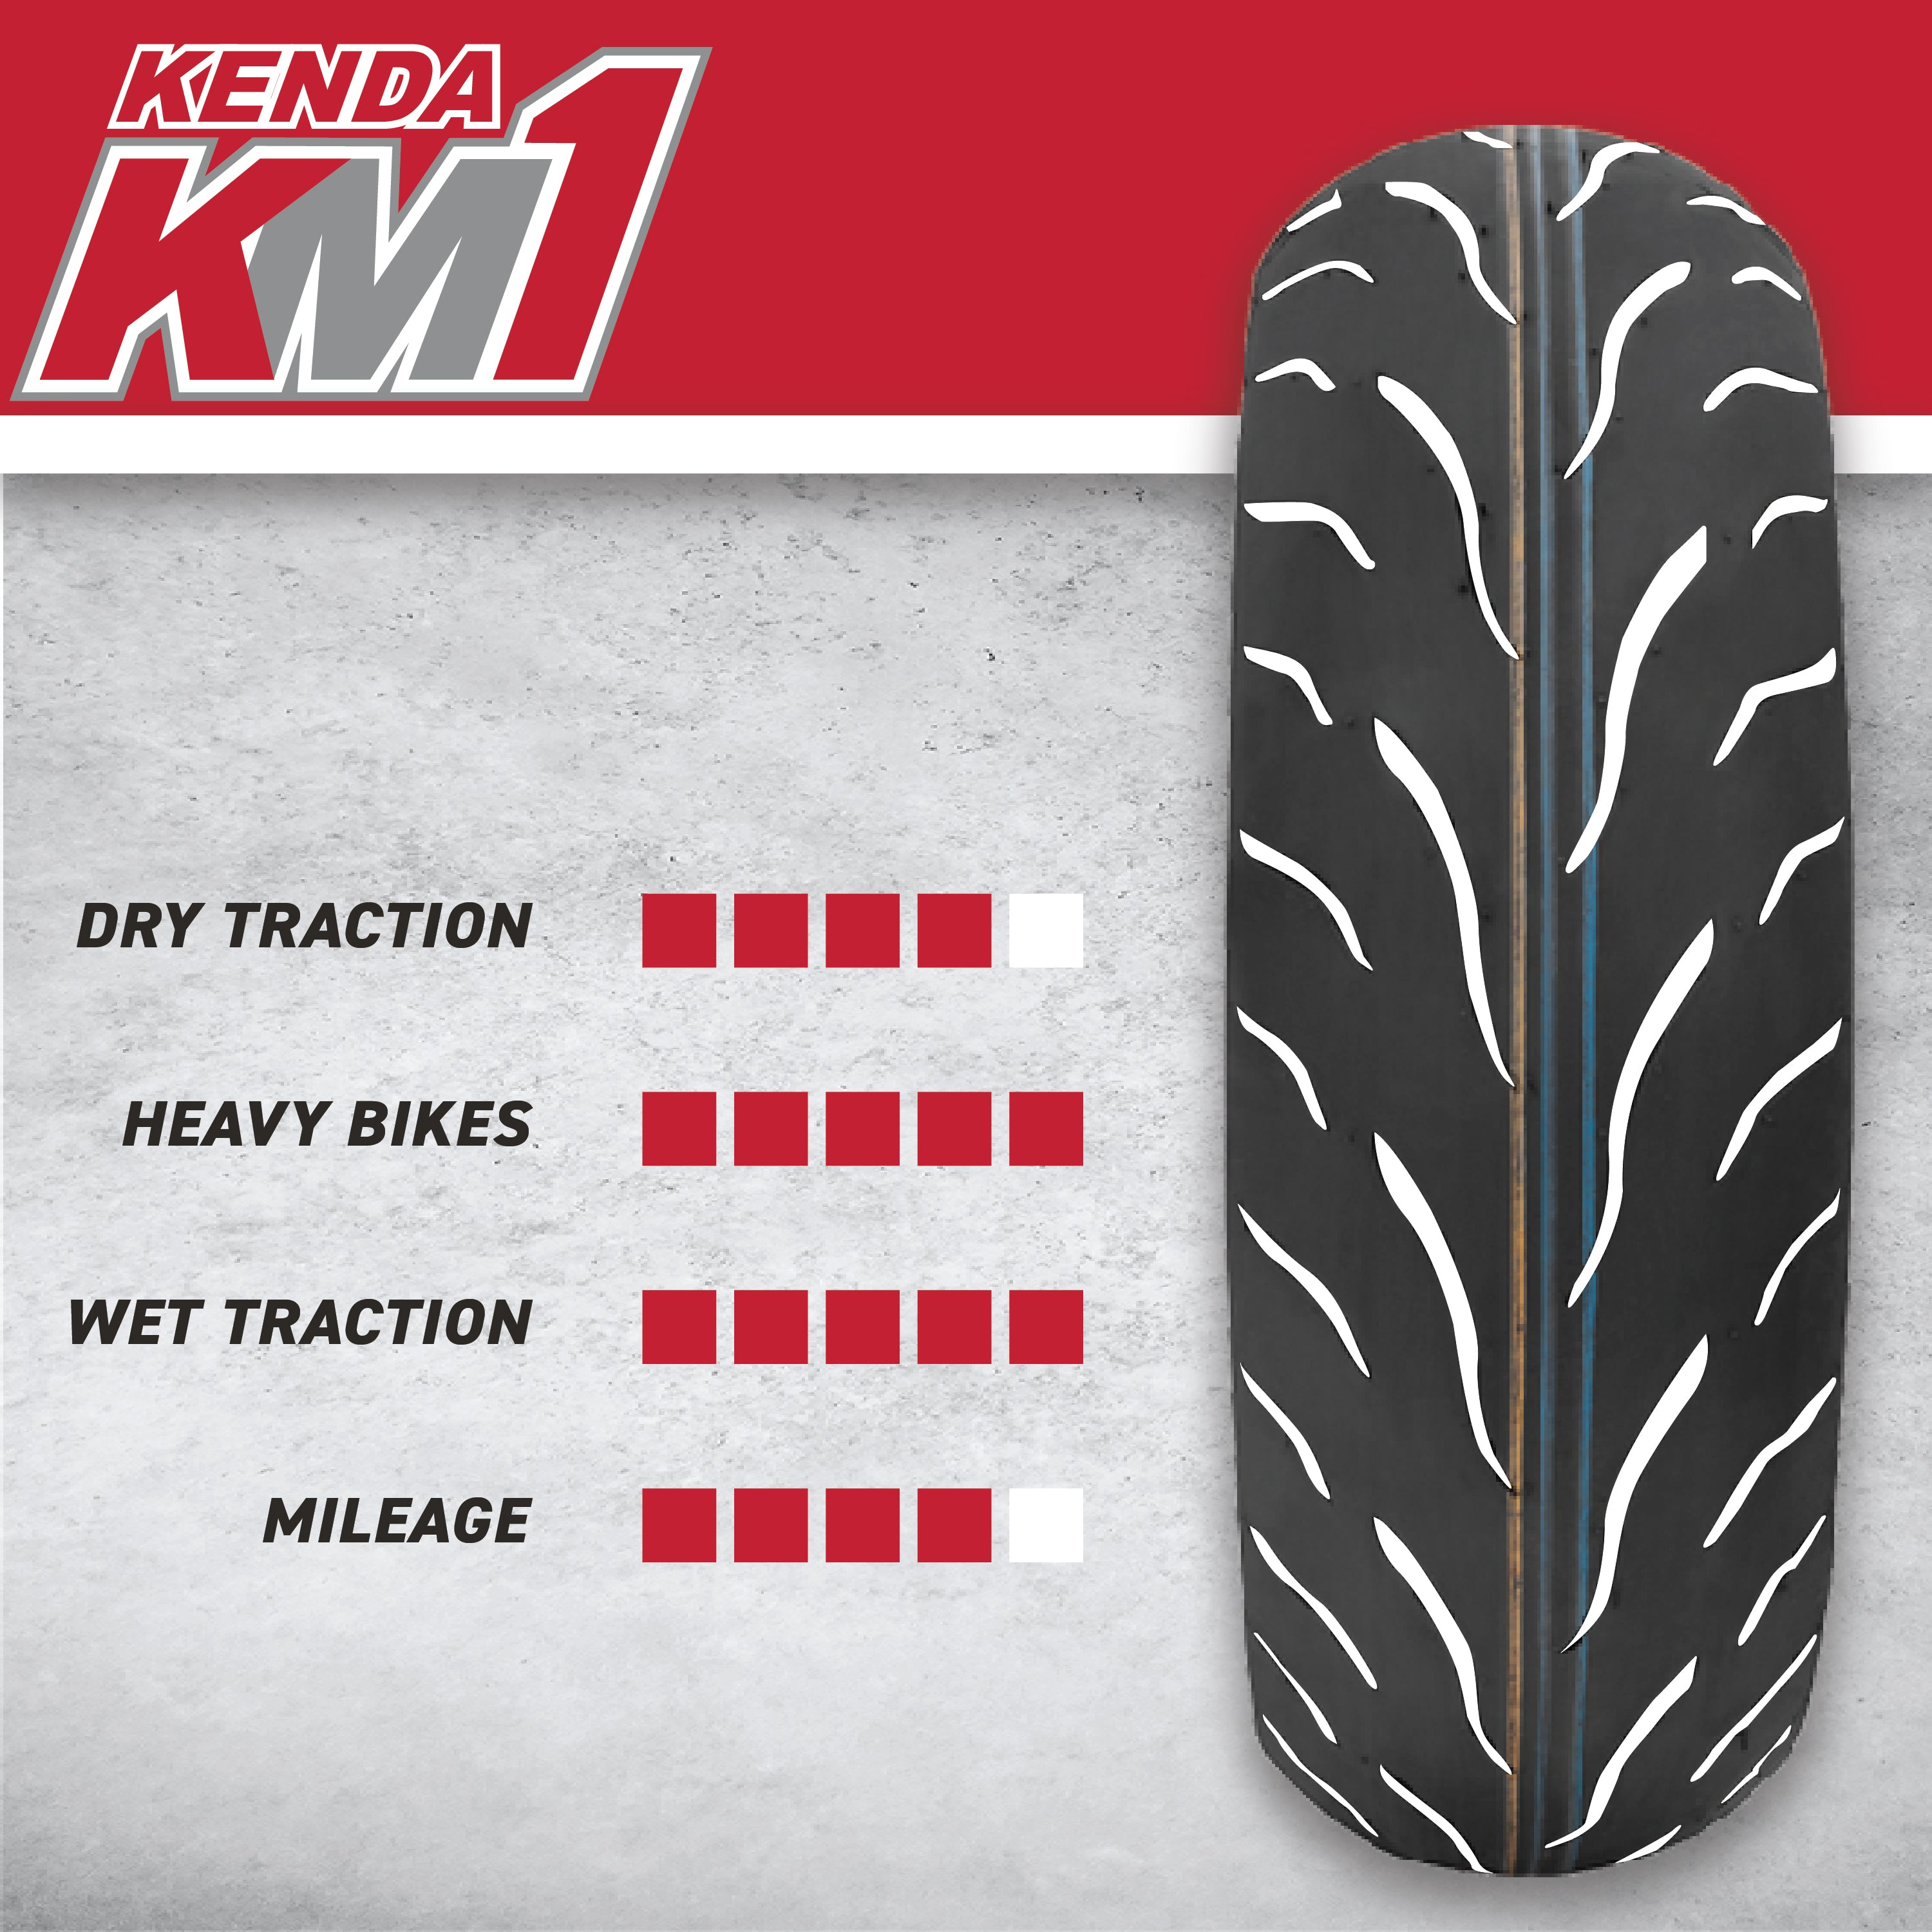 Kenda KM1 Sport Touring Front and Rear Motorcyle Tires 110/70ZR17 and Rear 190/50ZR17